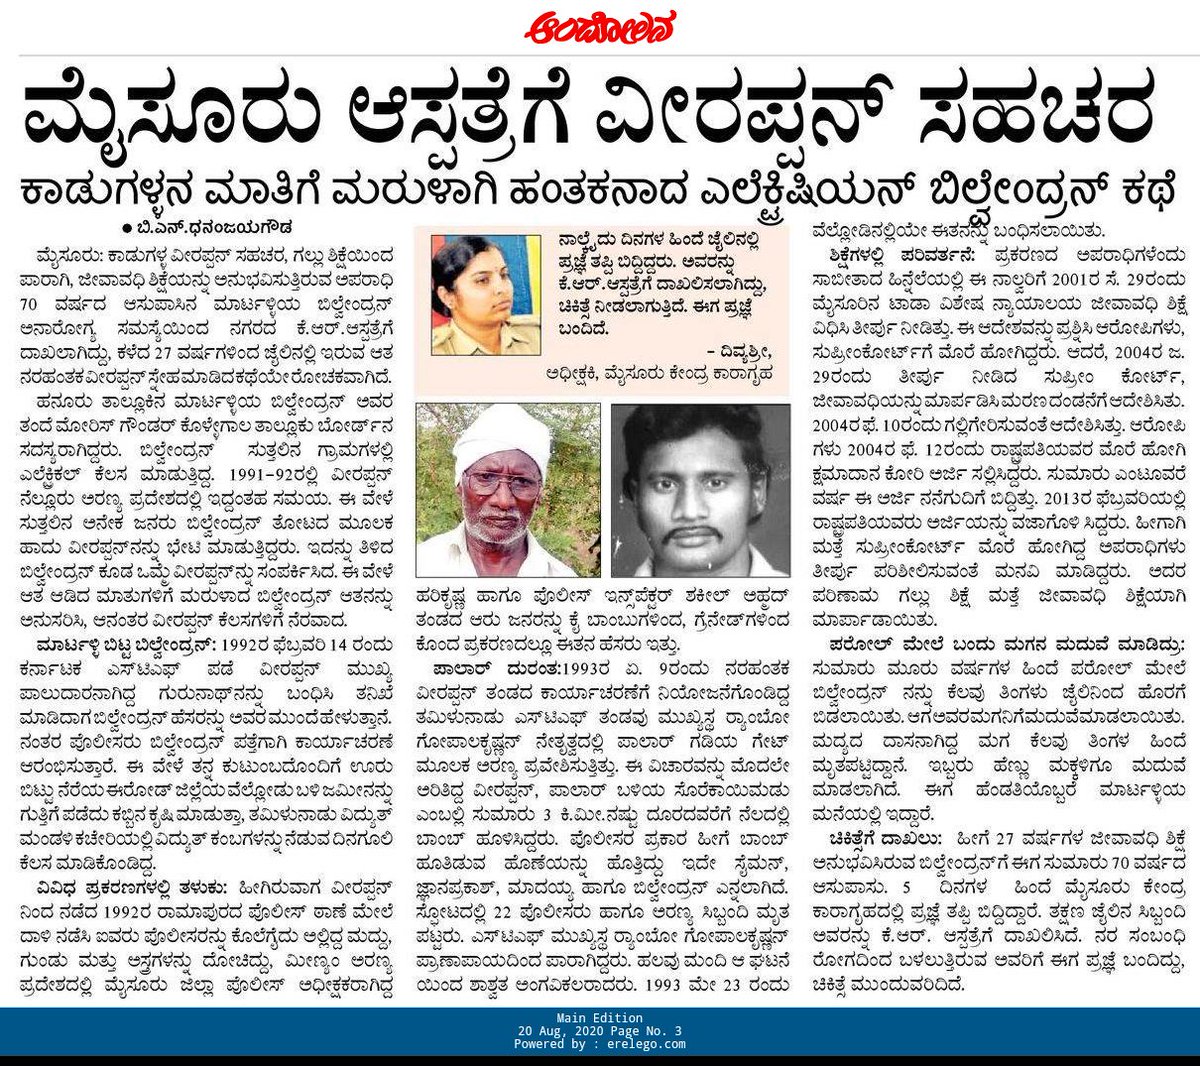 Bilvendran: He started out as an electrician and he turned to become a killer when he joined a companion of Veerappan. he passed away late last night in hospital, from the failure of treatment. @andolana1 @UmeshaTweetsAKB @siri_mysuru @uttnalli @lalataksha_s #andolanamysuru